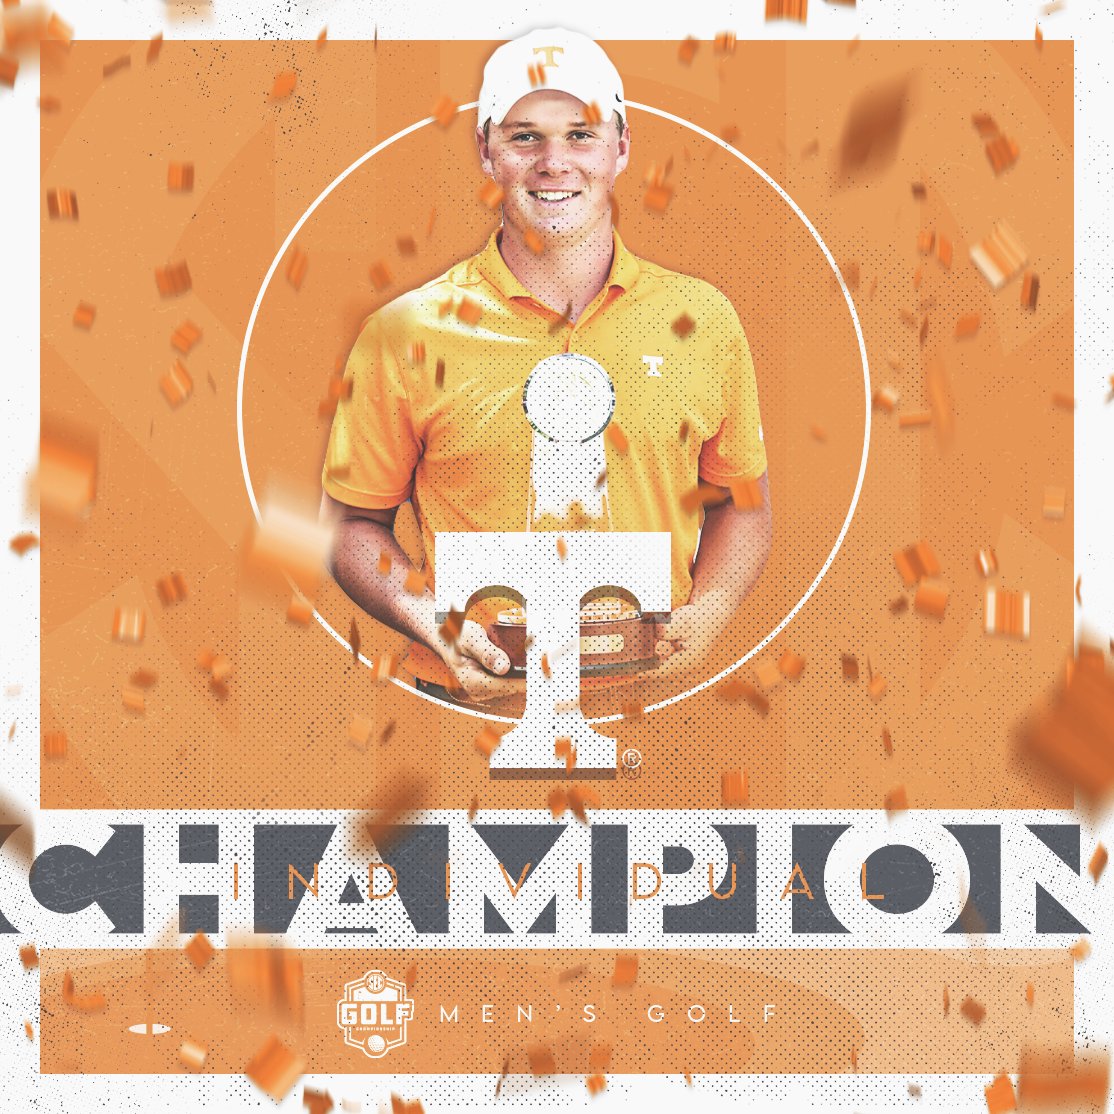 The Individual Champion. 🏆 @Vol_Golf's Caleb Surratt became the first freshman to claim the SEC title since Justin Thomas in 2012! #SECGolf x #SECChampionship